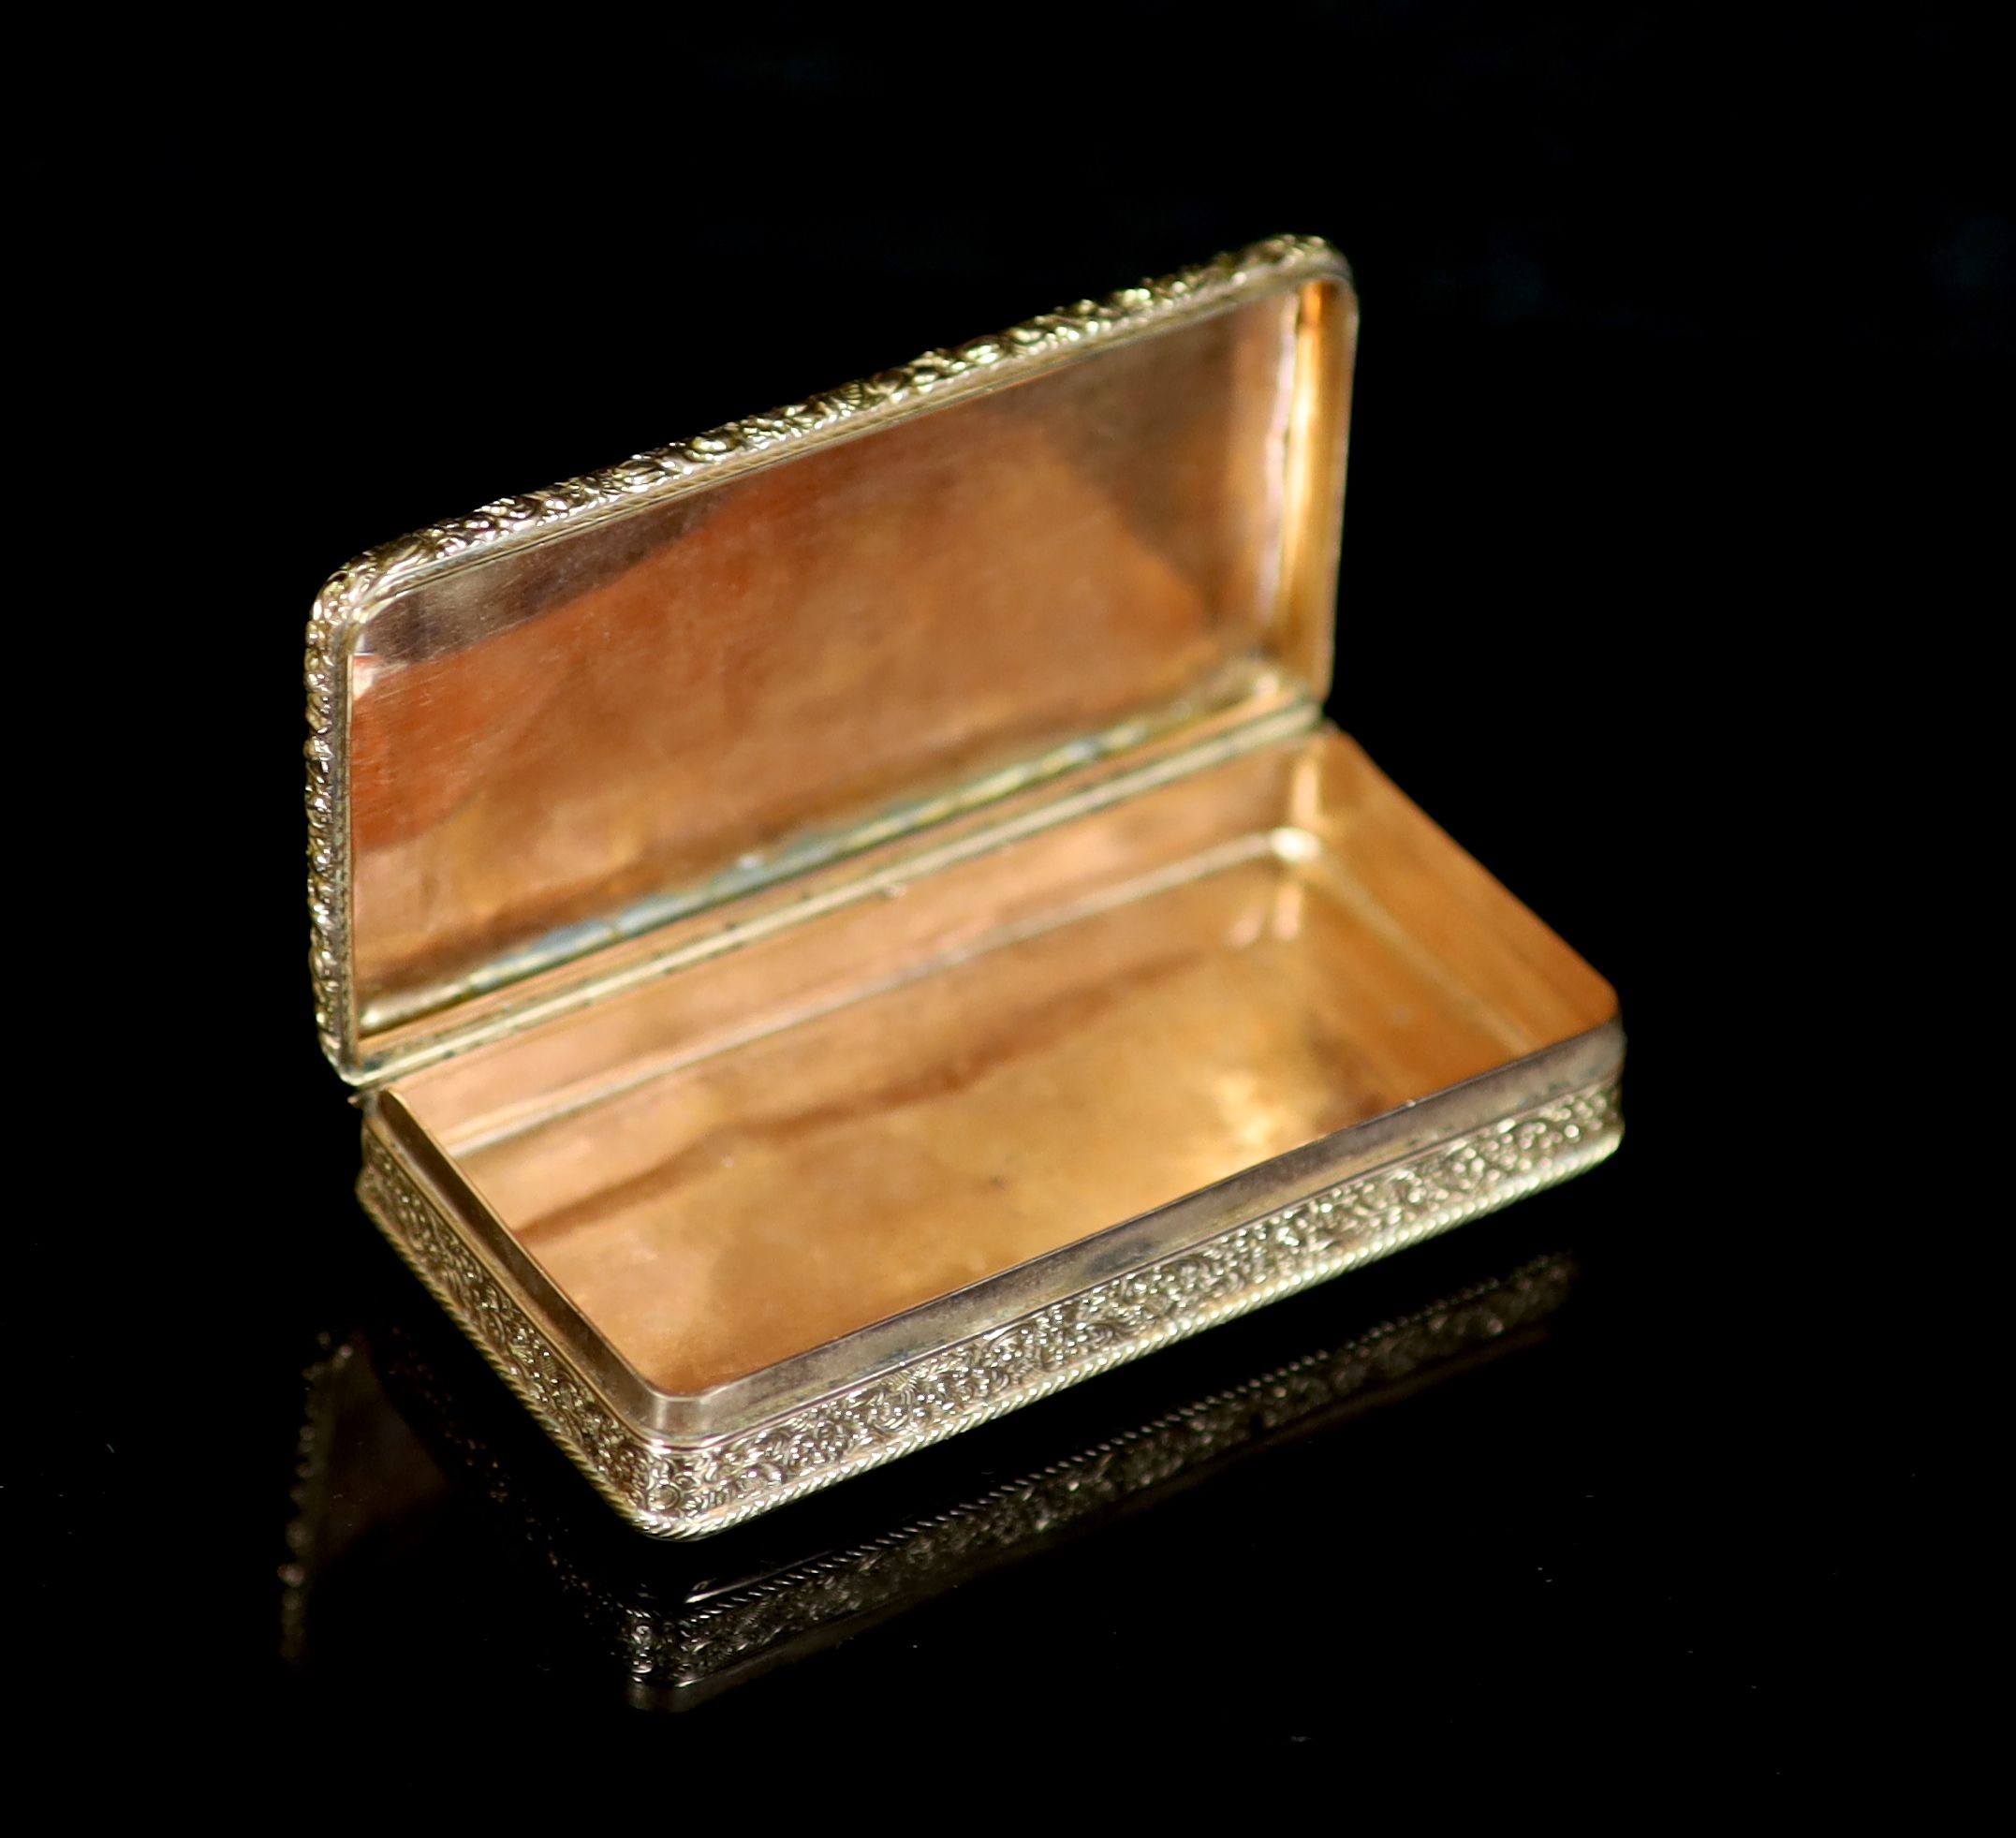 An early 19th century French engraved and engine turned gold rectangular snuff box, with hinged cover